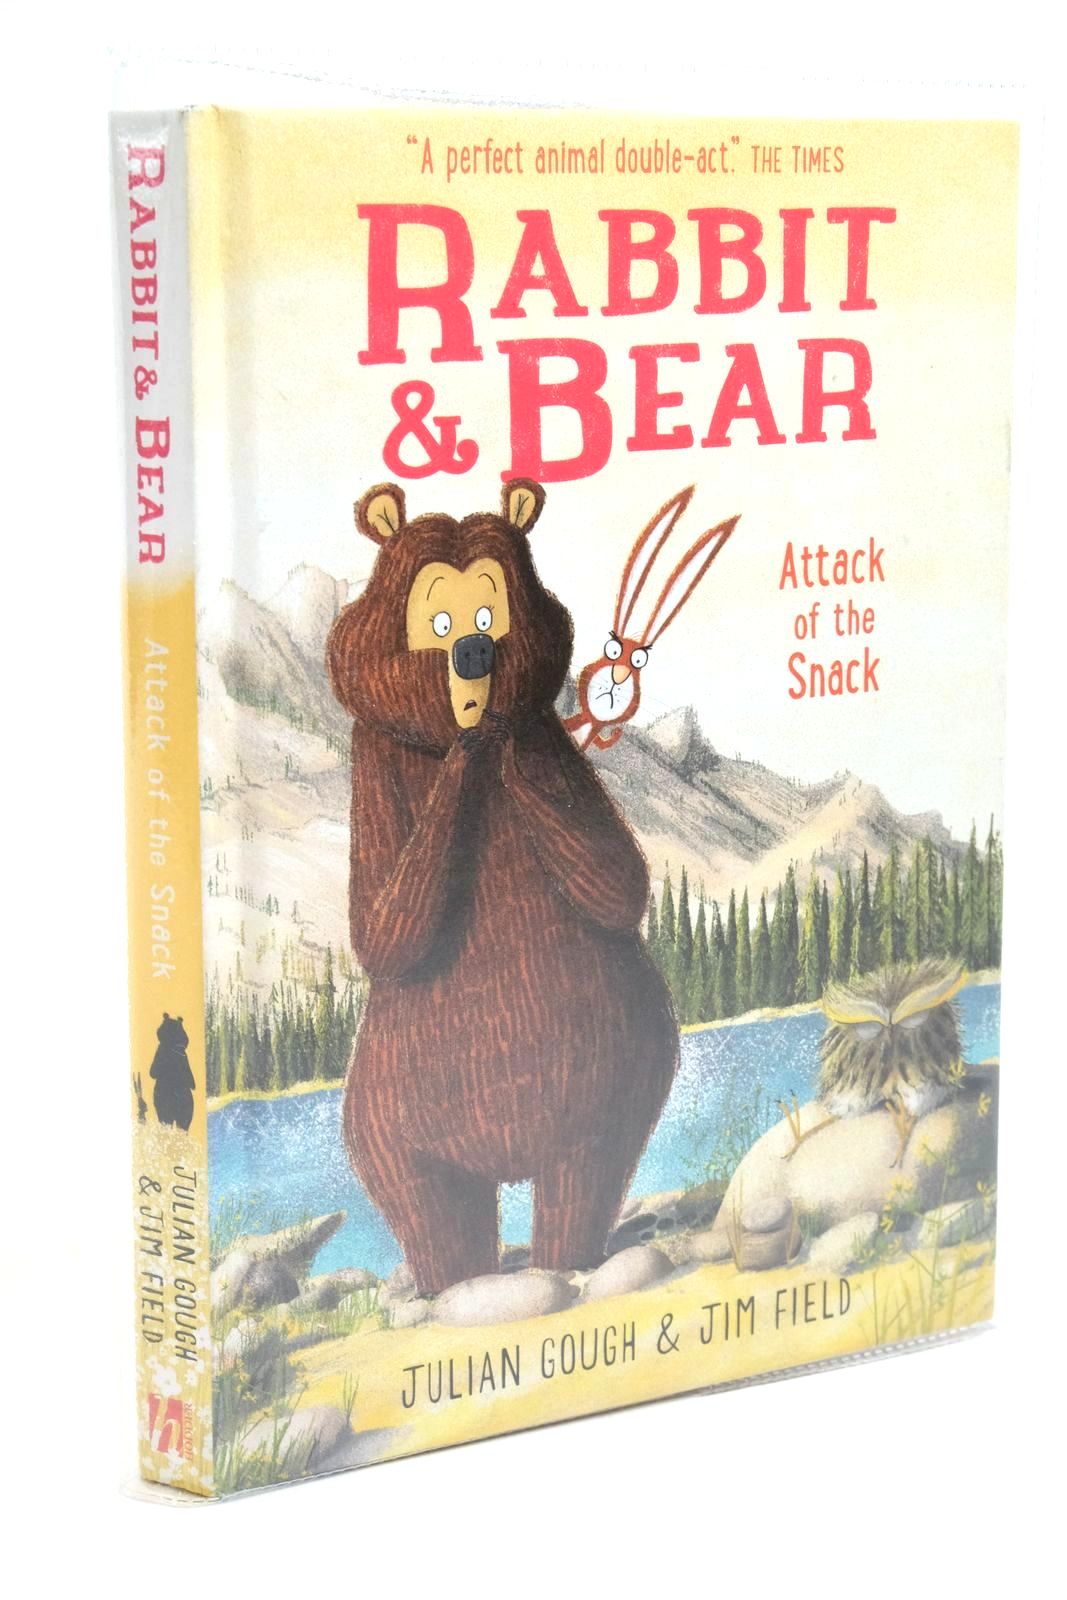 Photo of RABBIT & BEAR - ATTACK OF THE SNACK written by Gough, Julian illustrated by Field, Jim published by Hodder Children's Books (STOCK CODE: 1322410)  for sale by Stella & Rose's Books